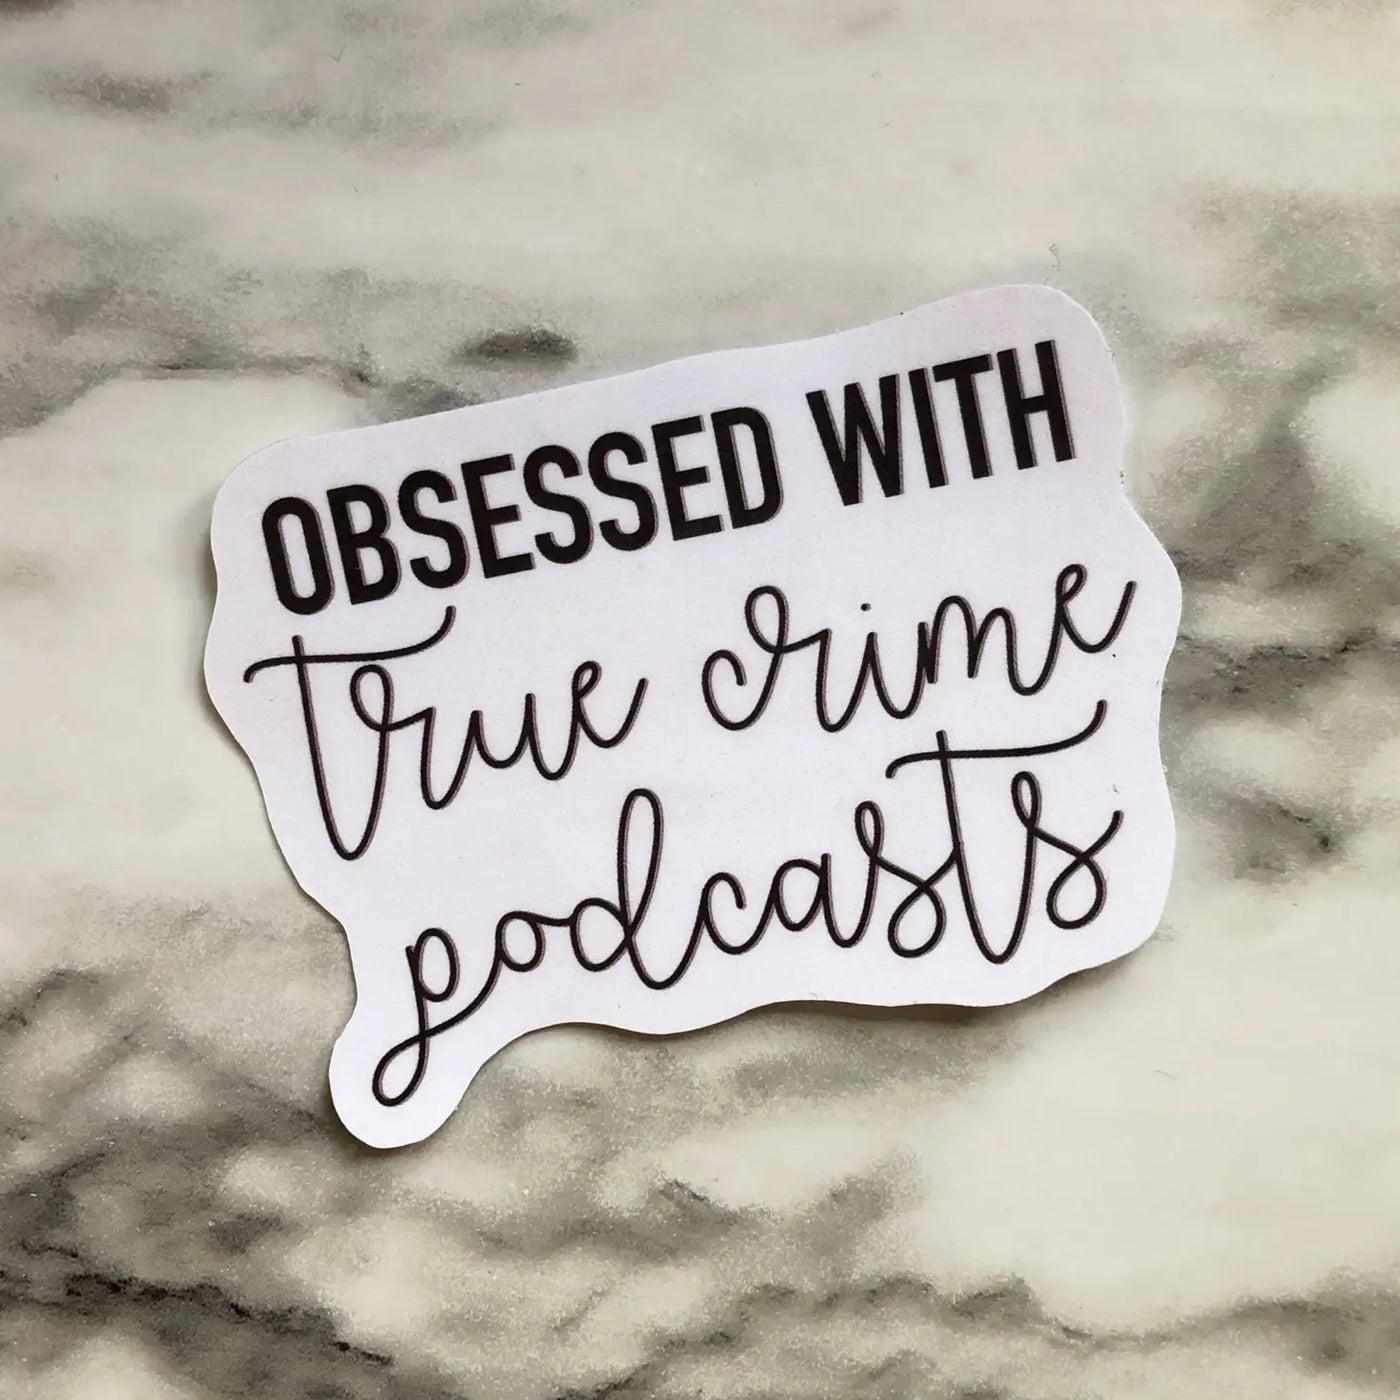 Obsessed with True Crime Podcasts Vinyl Sticker